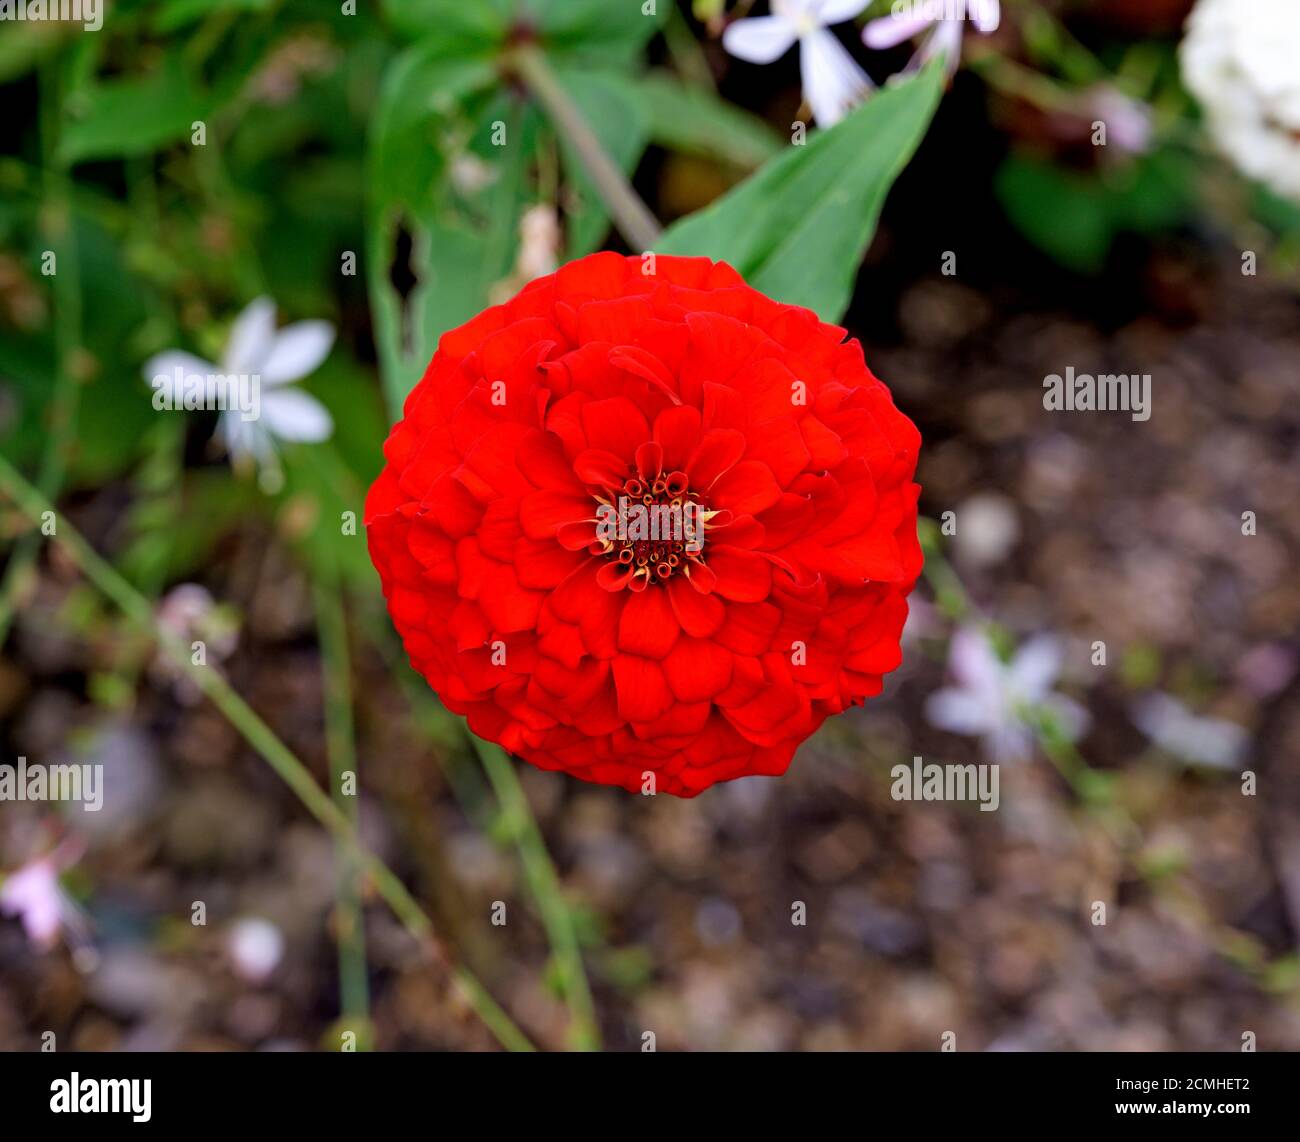 red blossom of a the plant species zinnia Stock Photo